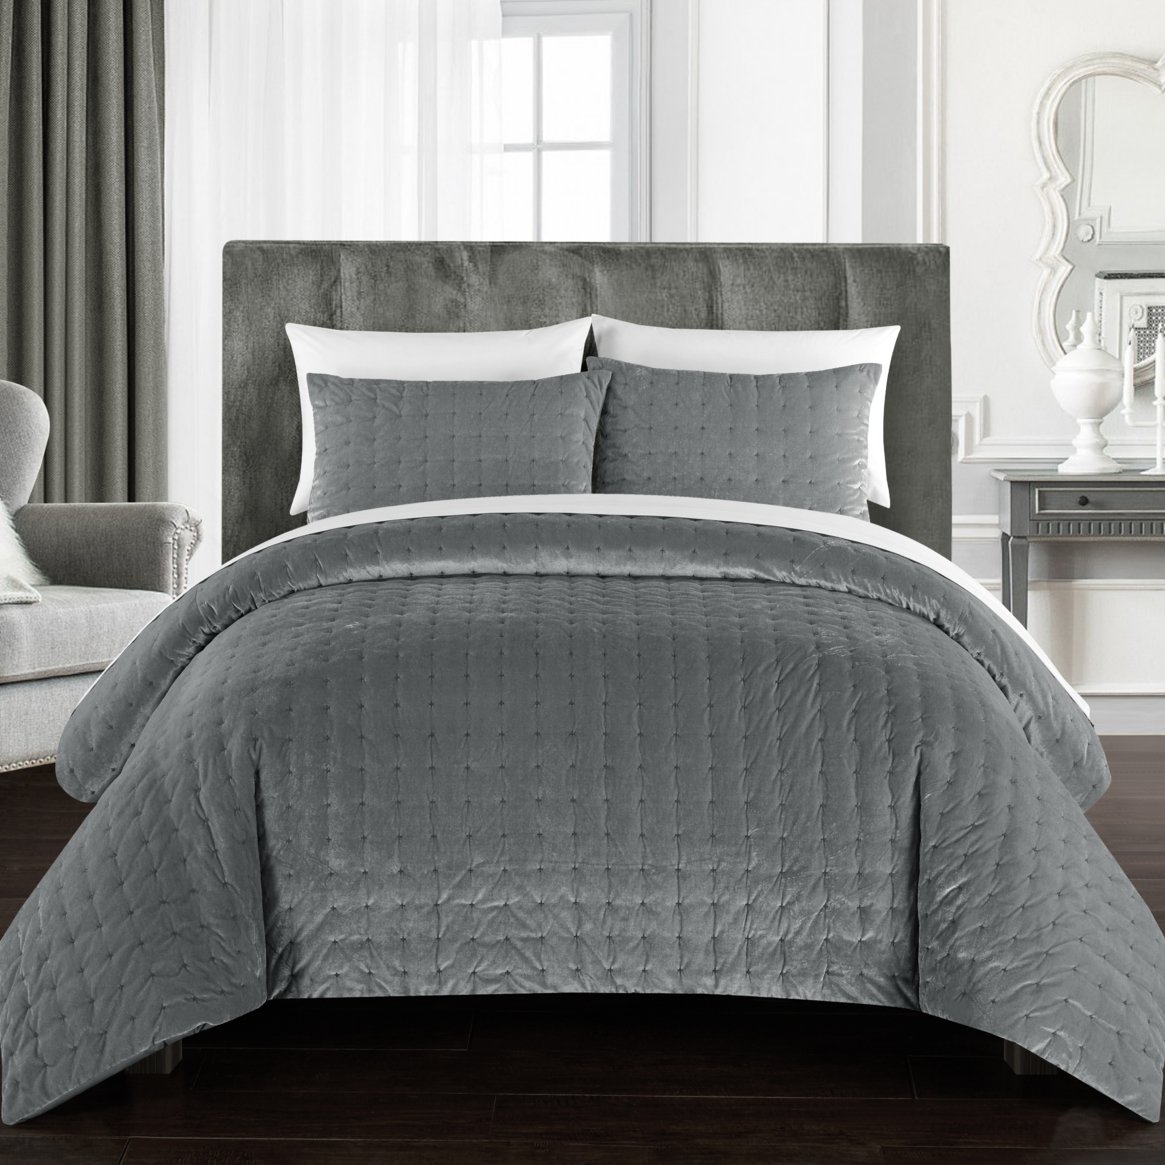 Chaya 7 Piece Comforter Set Luxurious Hand Stitched Velvet Bed In A Bag Bedding - Grey, King